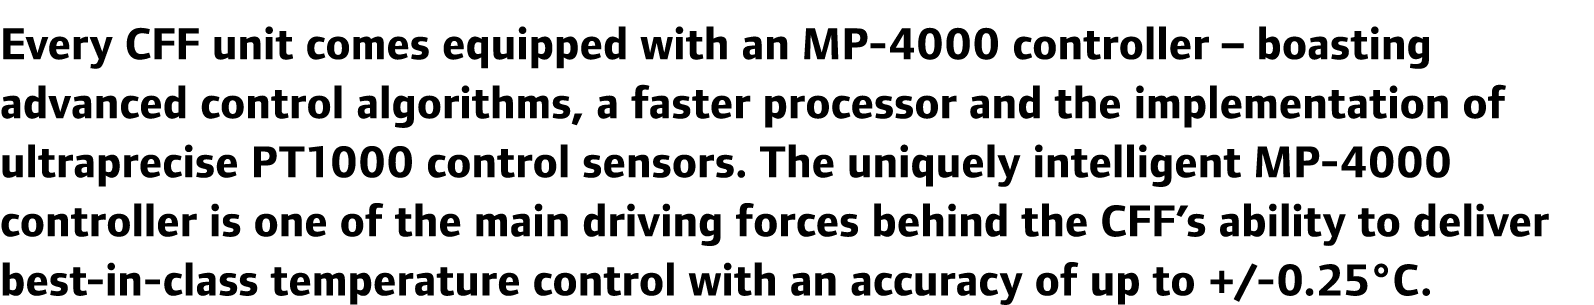 Every CFF unit comes equipped with an MP-4000 controller – boasting advanced control algorithms, a faster processor a...